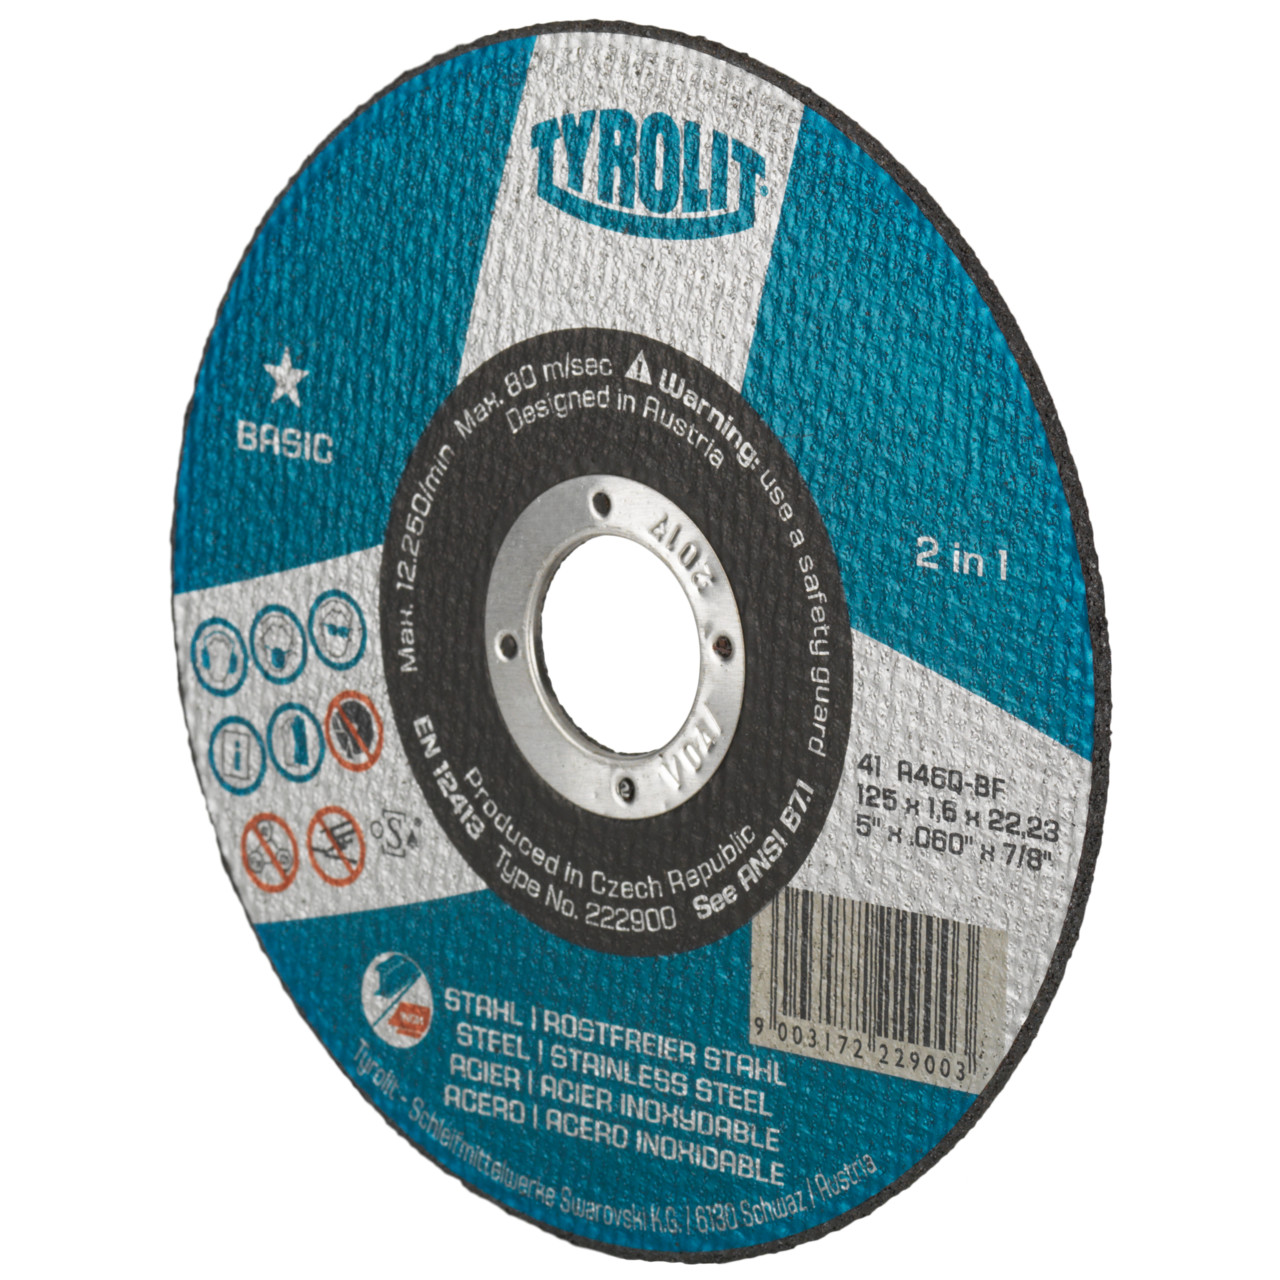 TYROLIT cut-off wheels DxDxH 230x2.0x22.23 2in1 for steel and stainless steel, shape: 41 - straight version, Art. 34332877